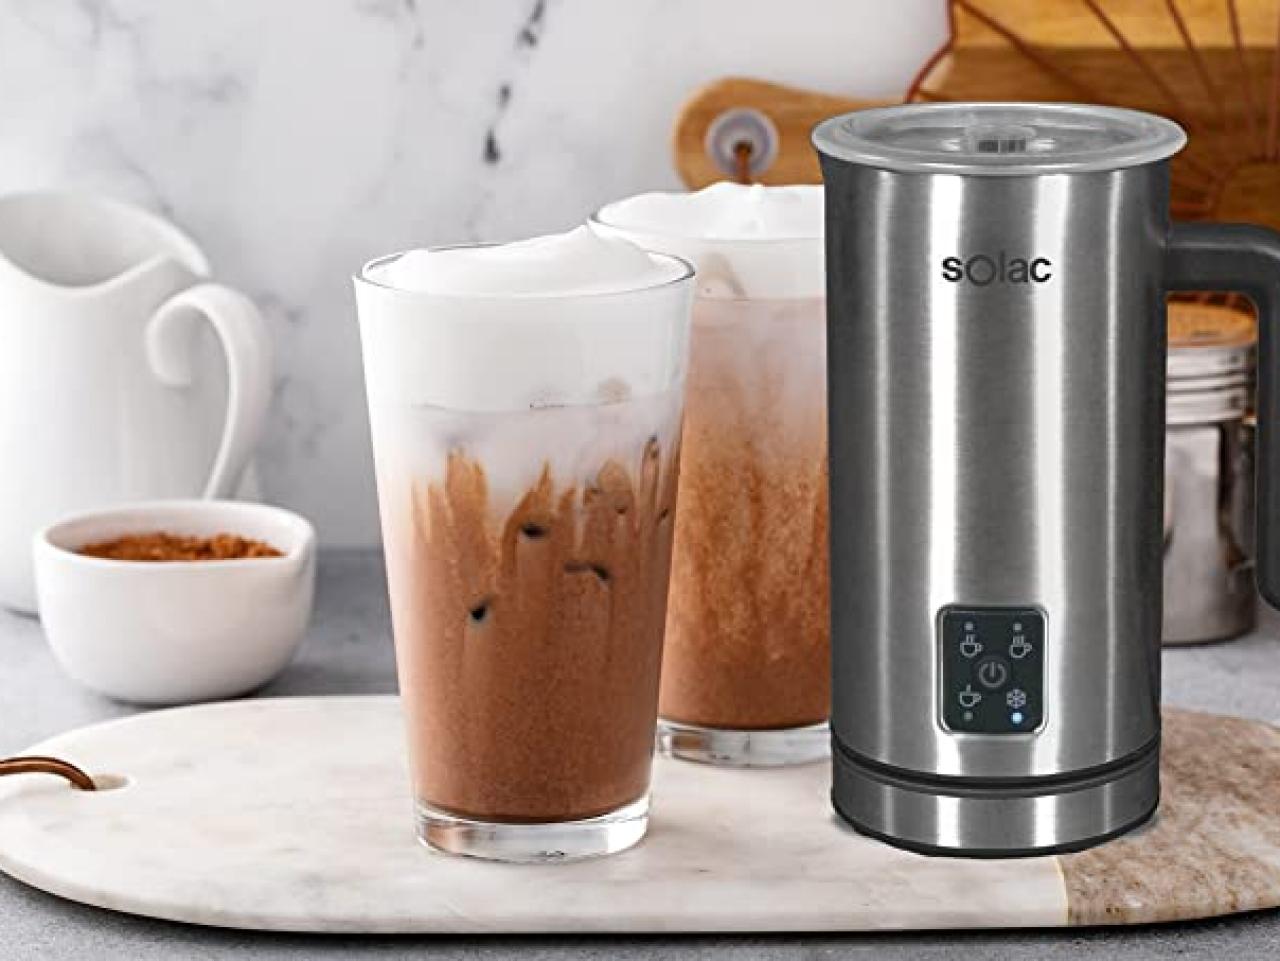 https://hgtvhome.sndimg.com/content/dam/images/hgtv/products/2023/1/13/rx_amazonsolac-pro-foam-stainless-steel-milk-frother-and-hot-chocolate-mixer.jpeg.rend.hgtvcom.1280.960.suffix/1673631700573.jpeg